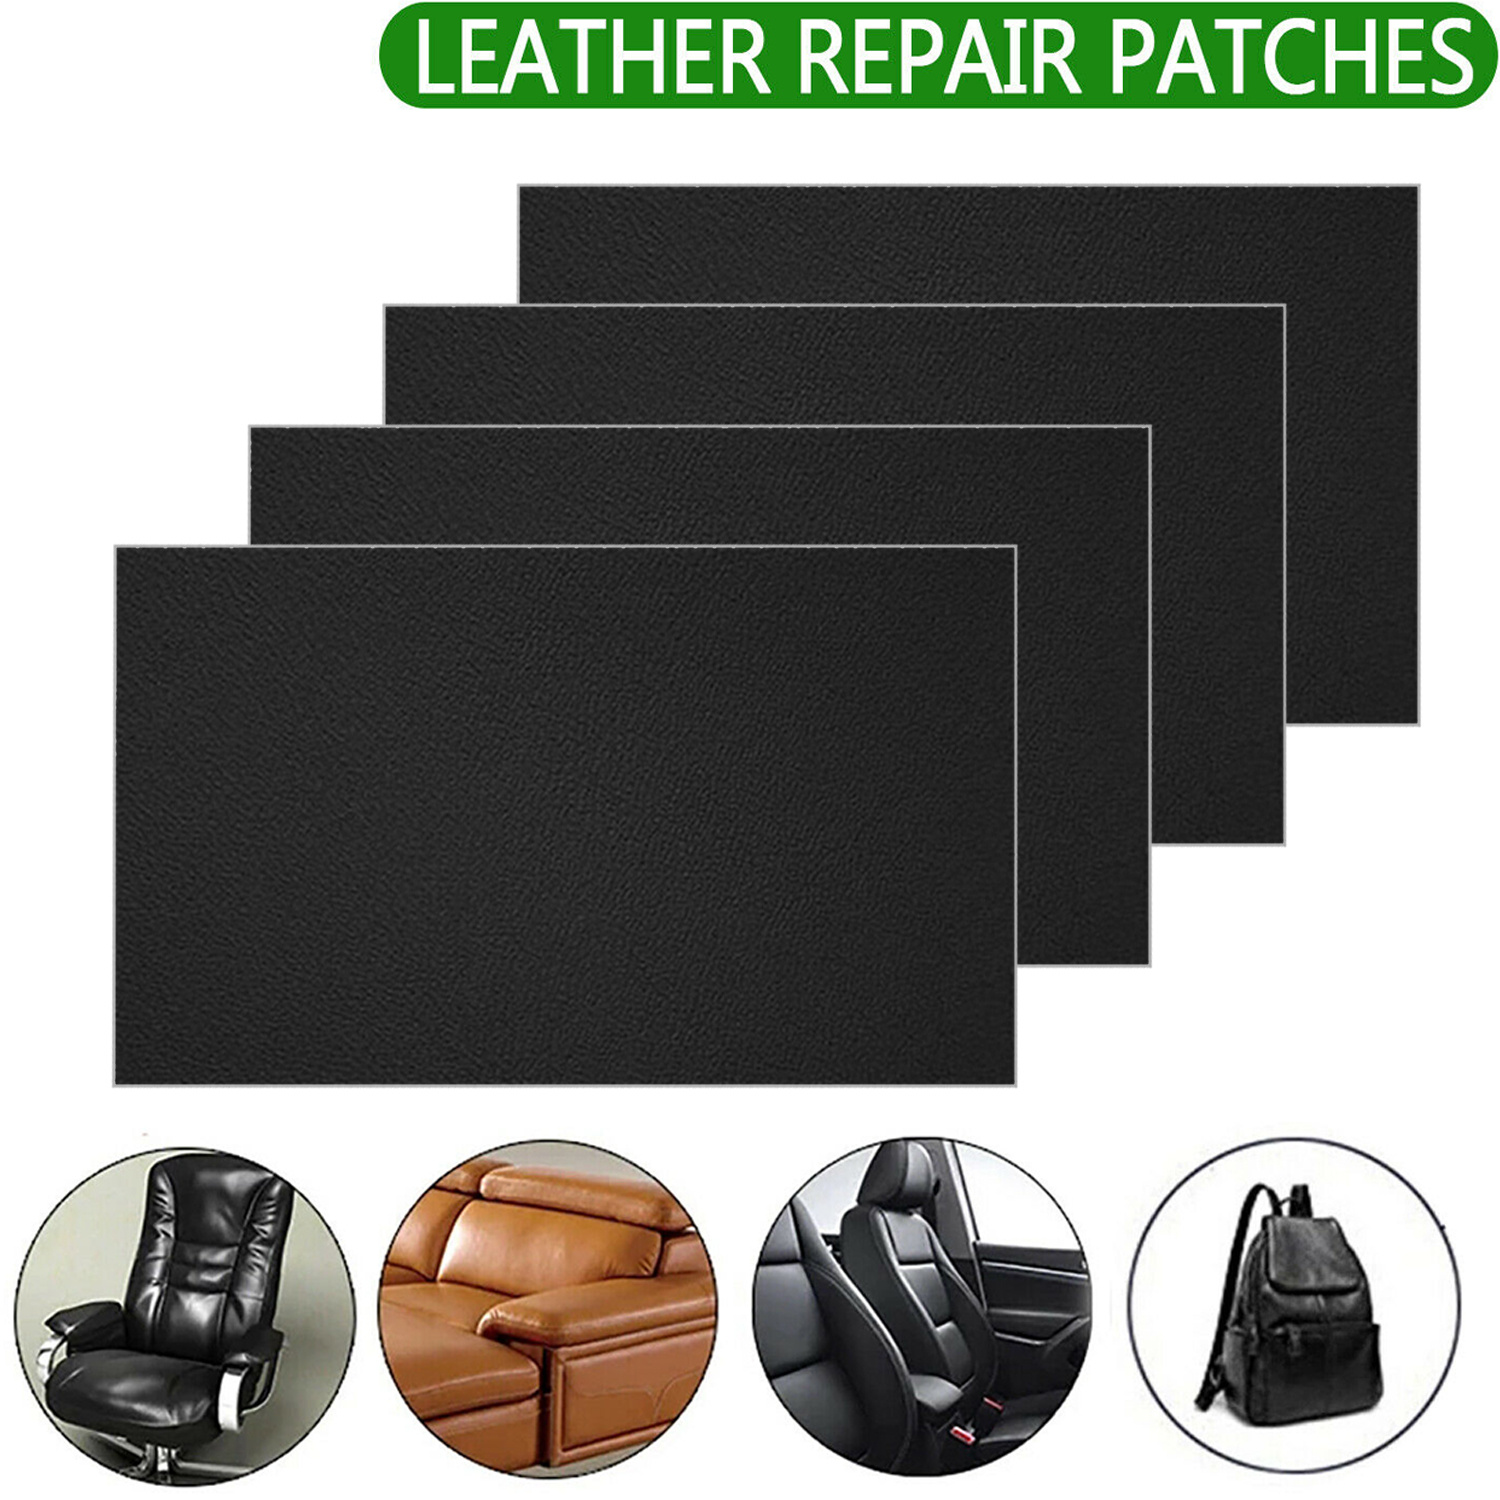 Leather Repair Patch, 13x55 inch Leather Patches for Furniture, Self-Adhesive Leather Repair Tape for Couch Car Seat Sofa Chairs